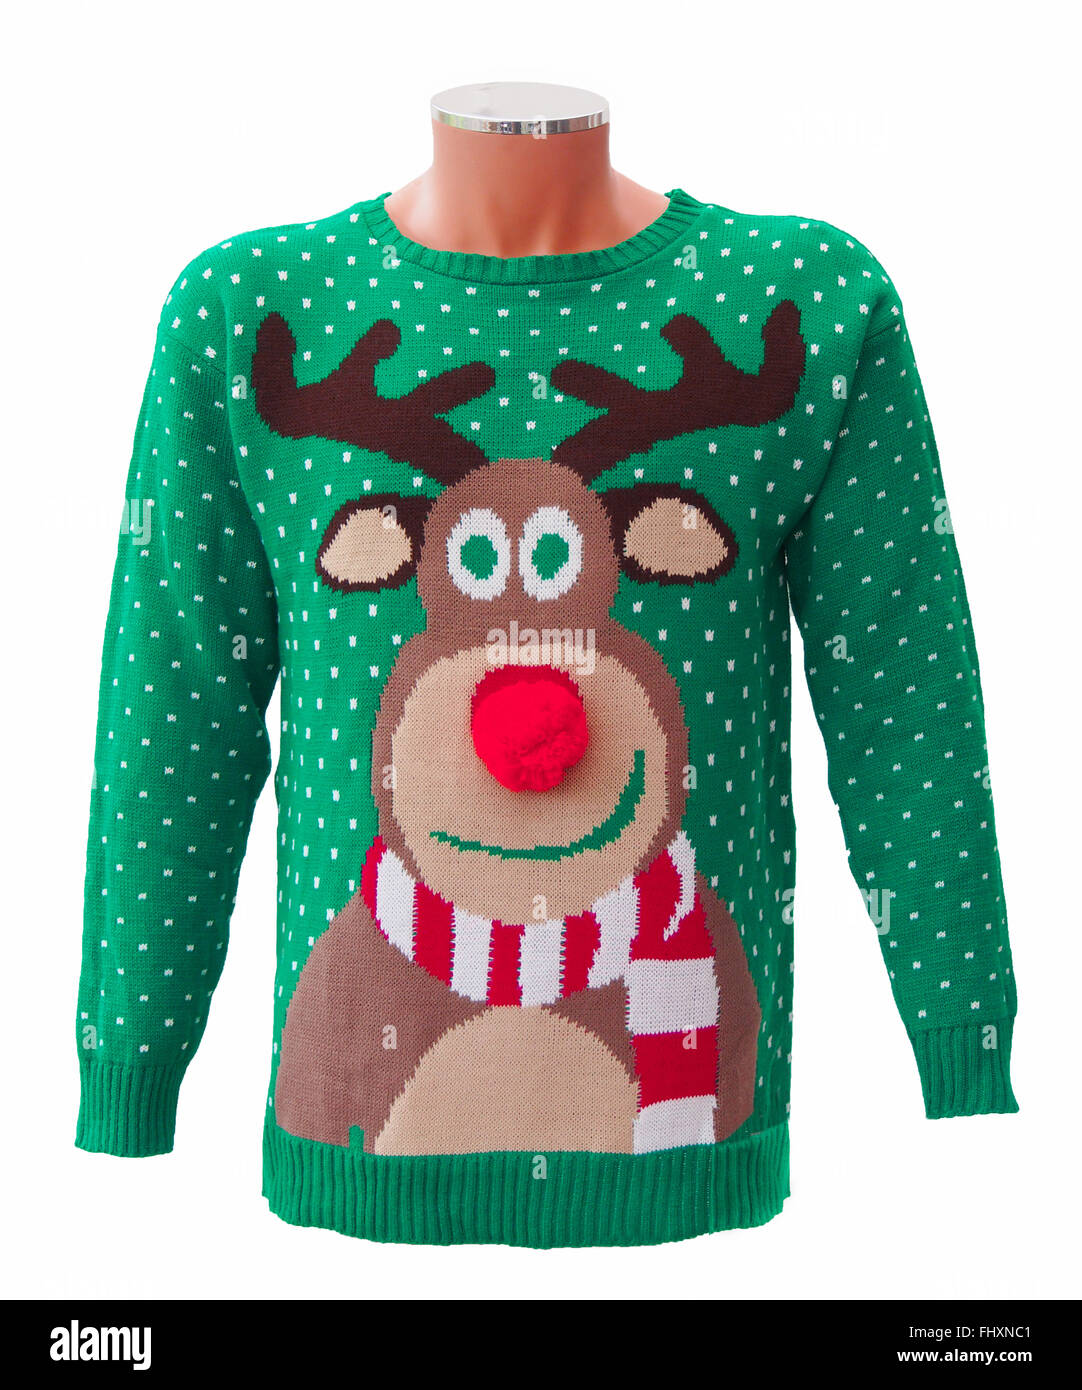 Green knitted adults' Christmas jumper, featuring Rudolph the red nosed reindeer and snowflakes, isolated on a white background. Stock Photo